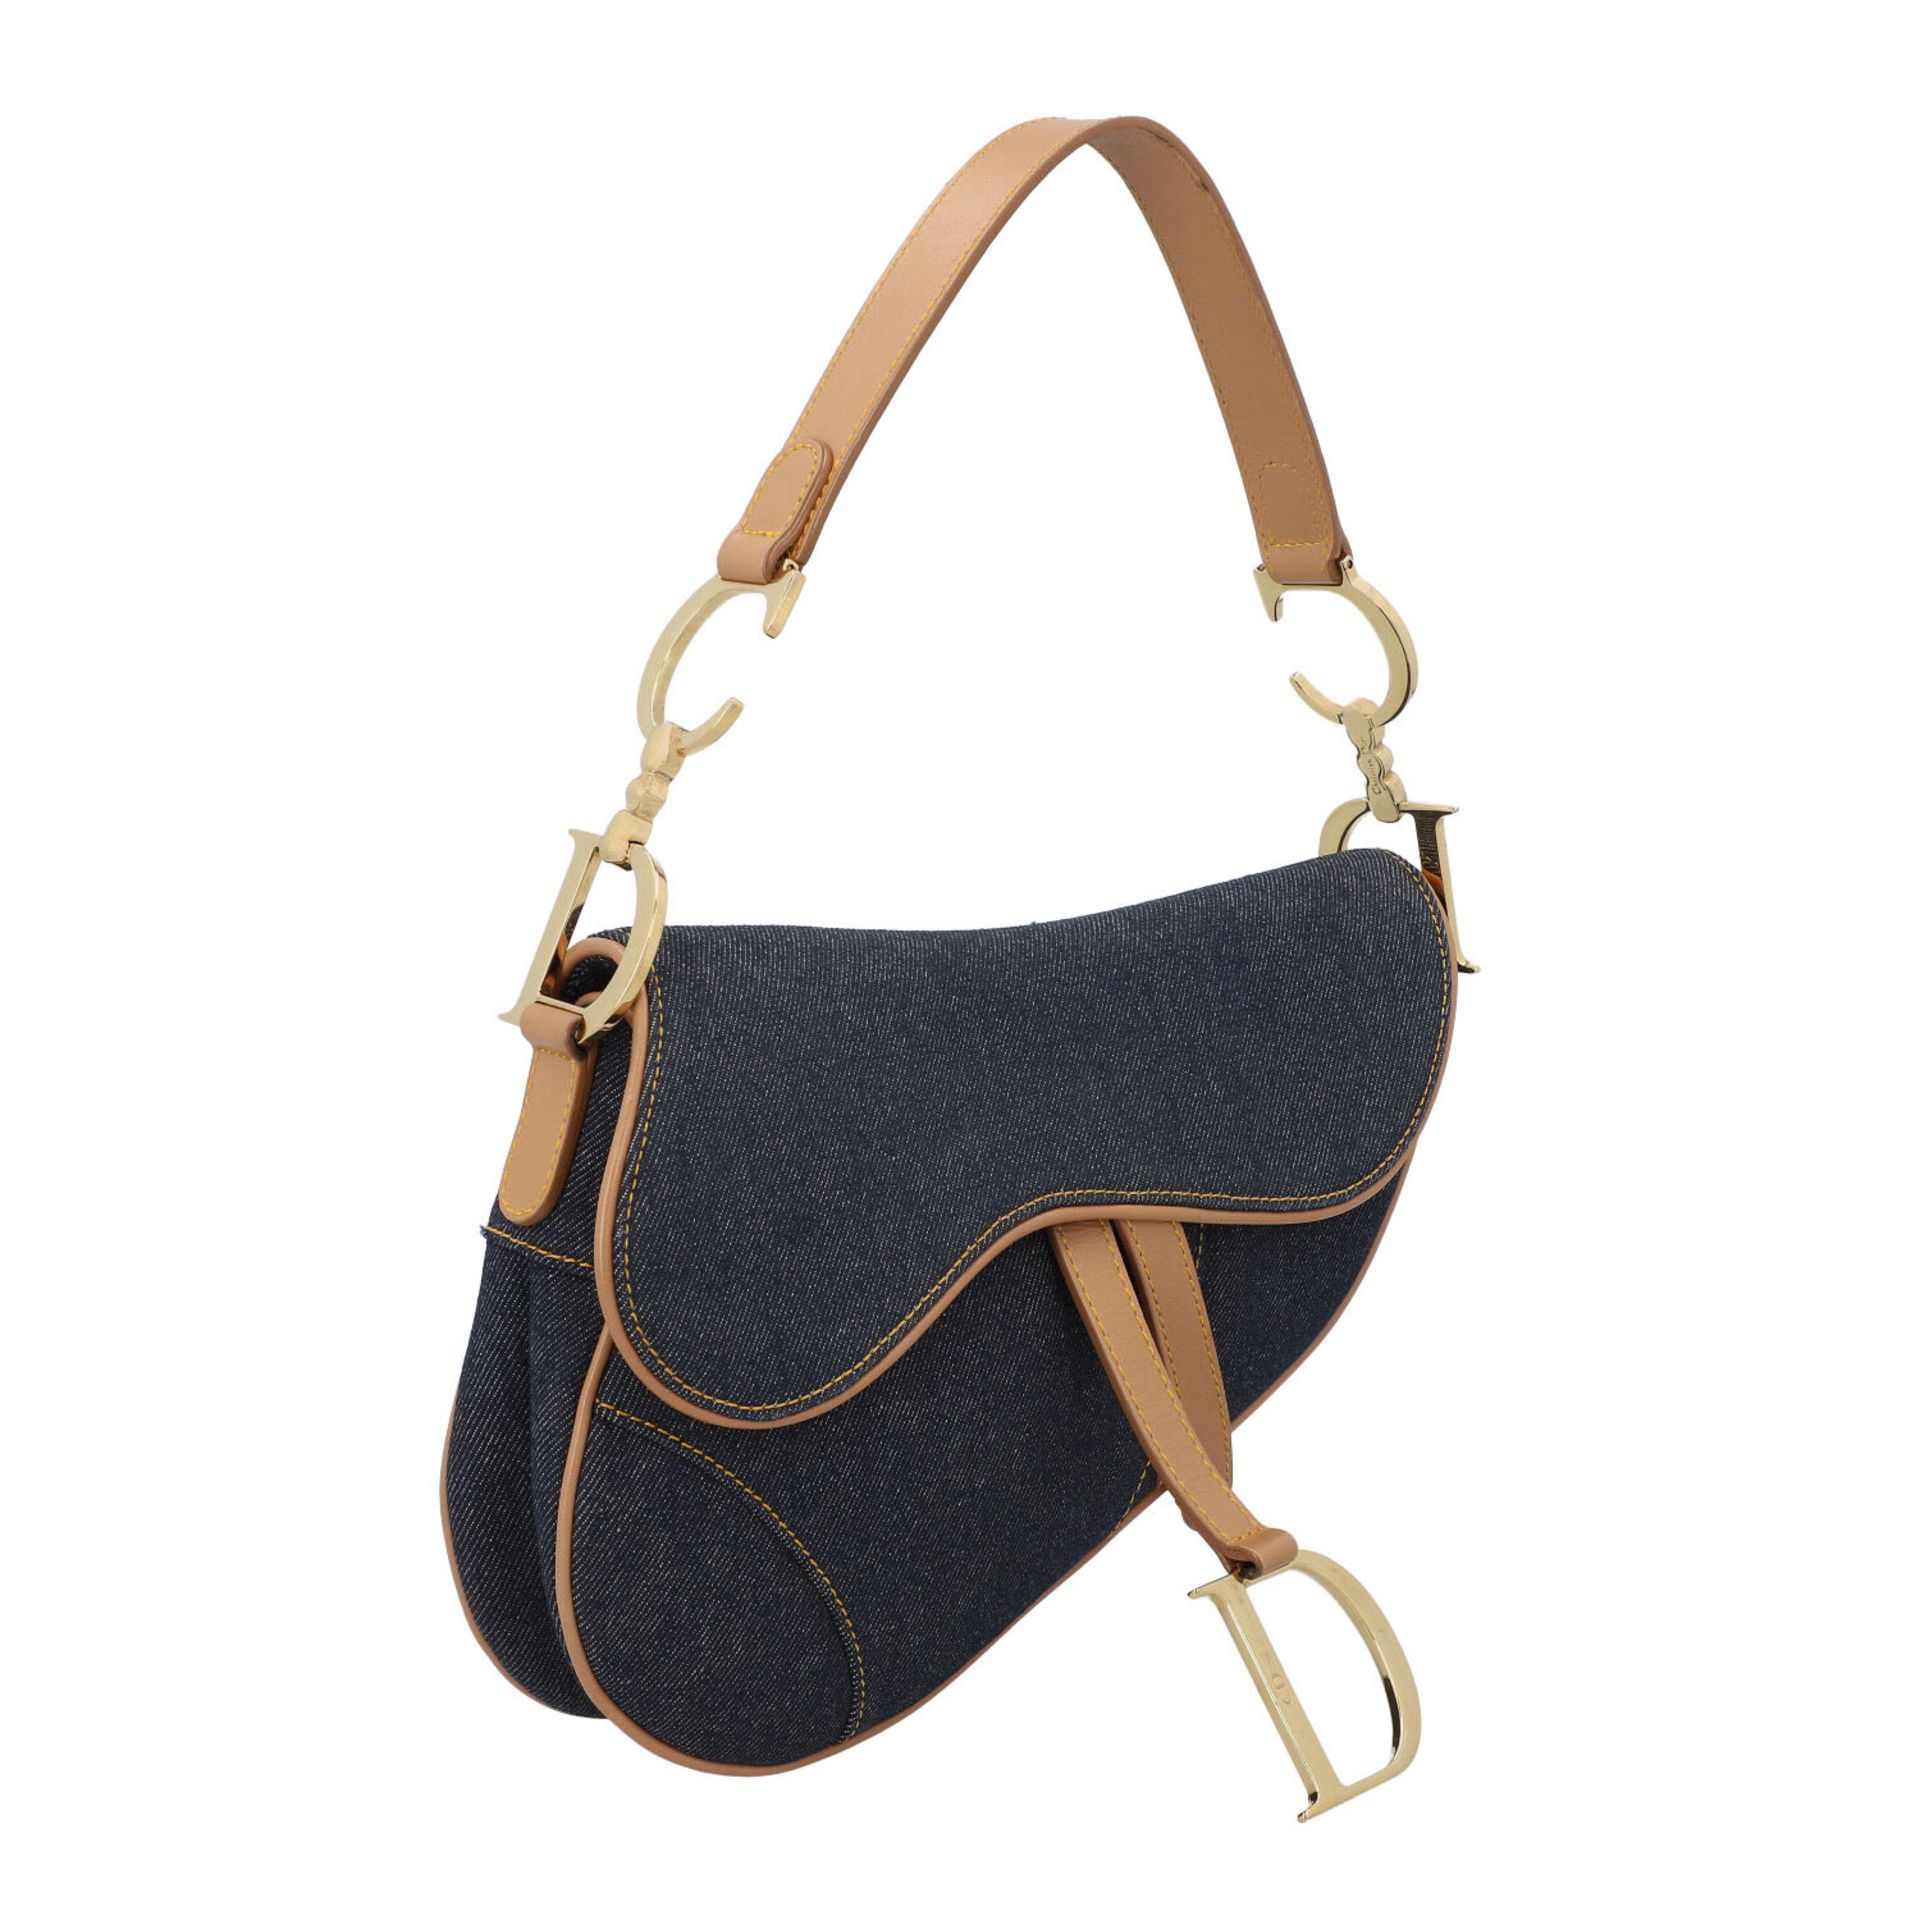 CHRISTIAN DIOR Schultertasche "SADDLE BAG". - Image 2 of 8